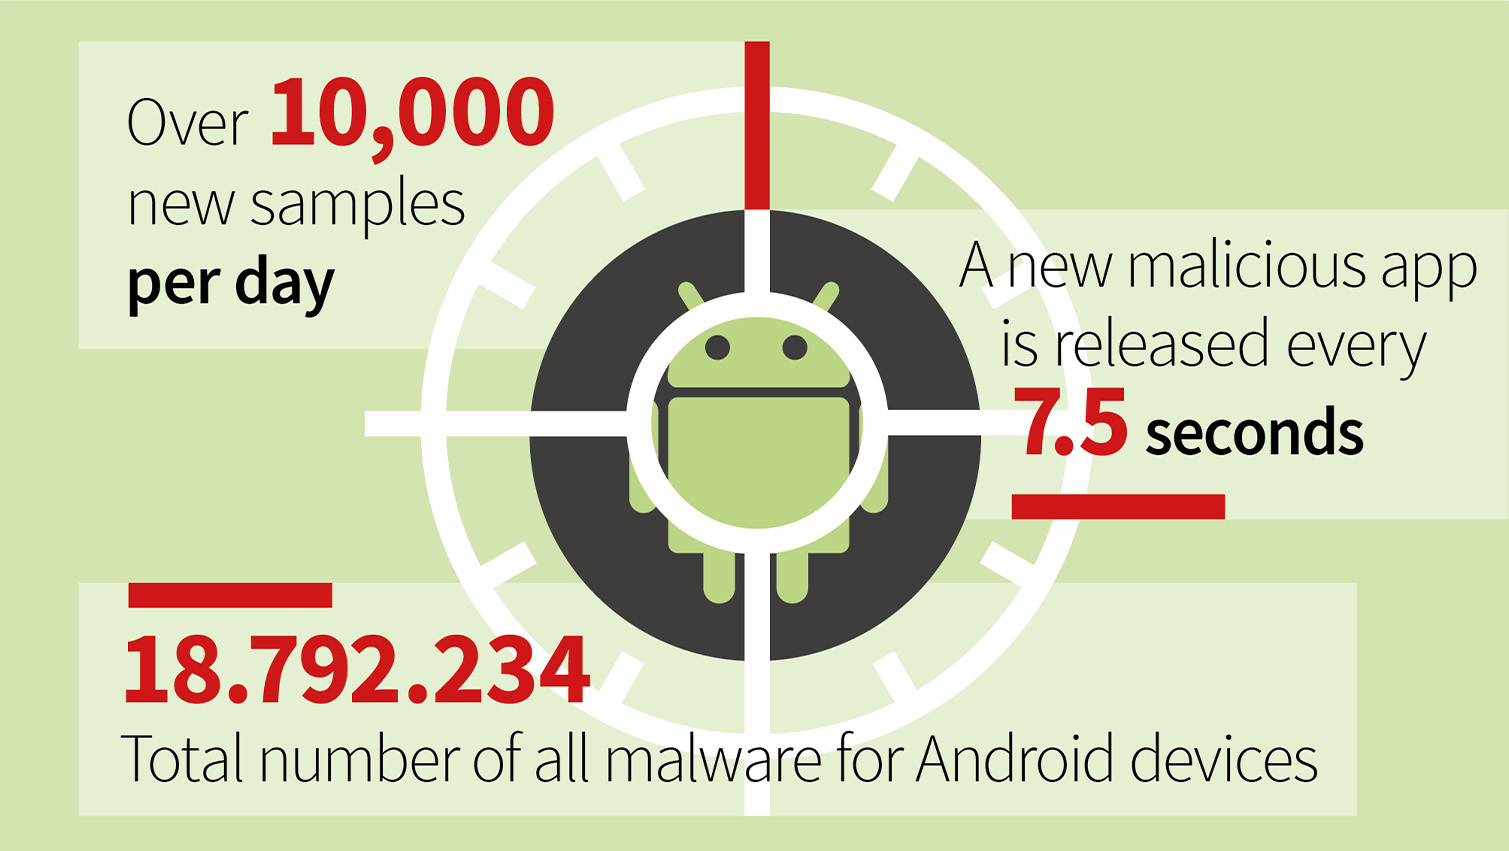 G DATA Infographic MMR 2019 Android Malware Numbers EN